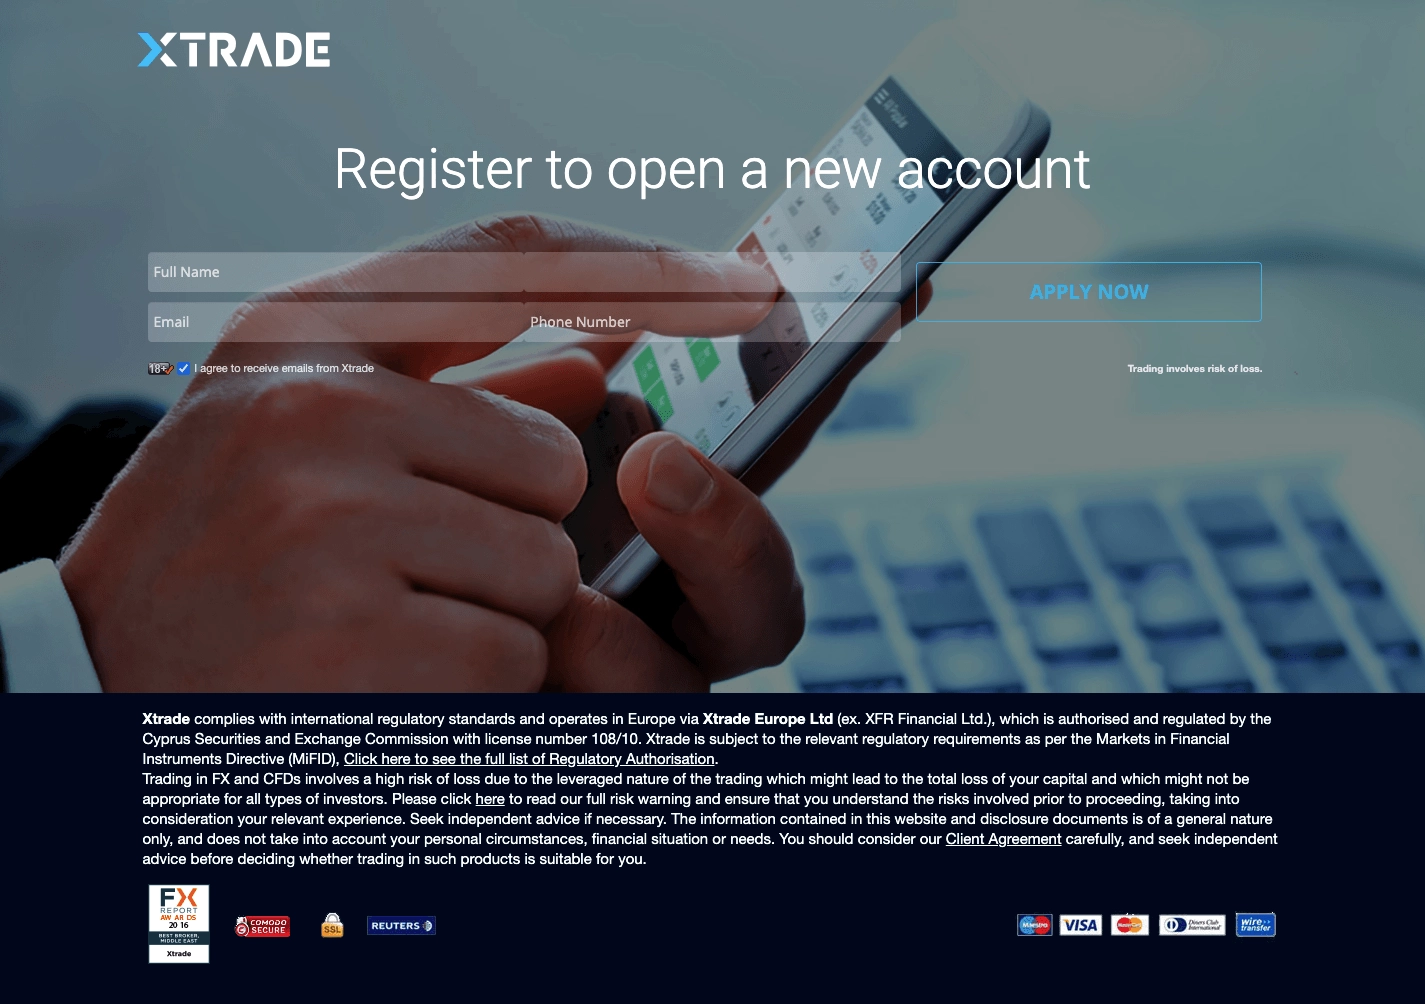 Example of financial service landing page (XTRADE)